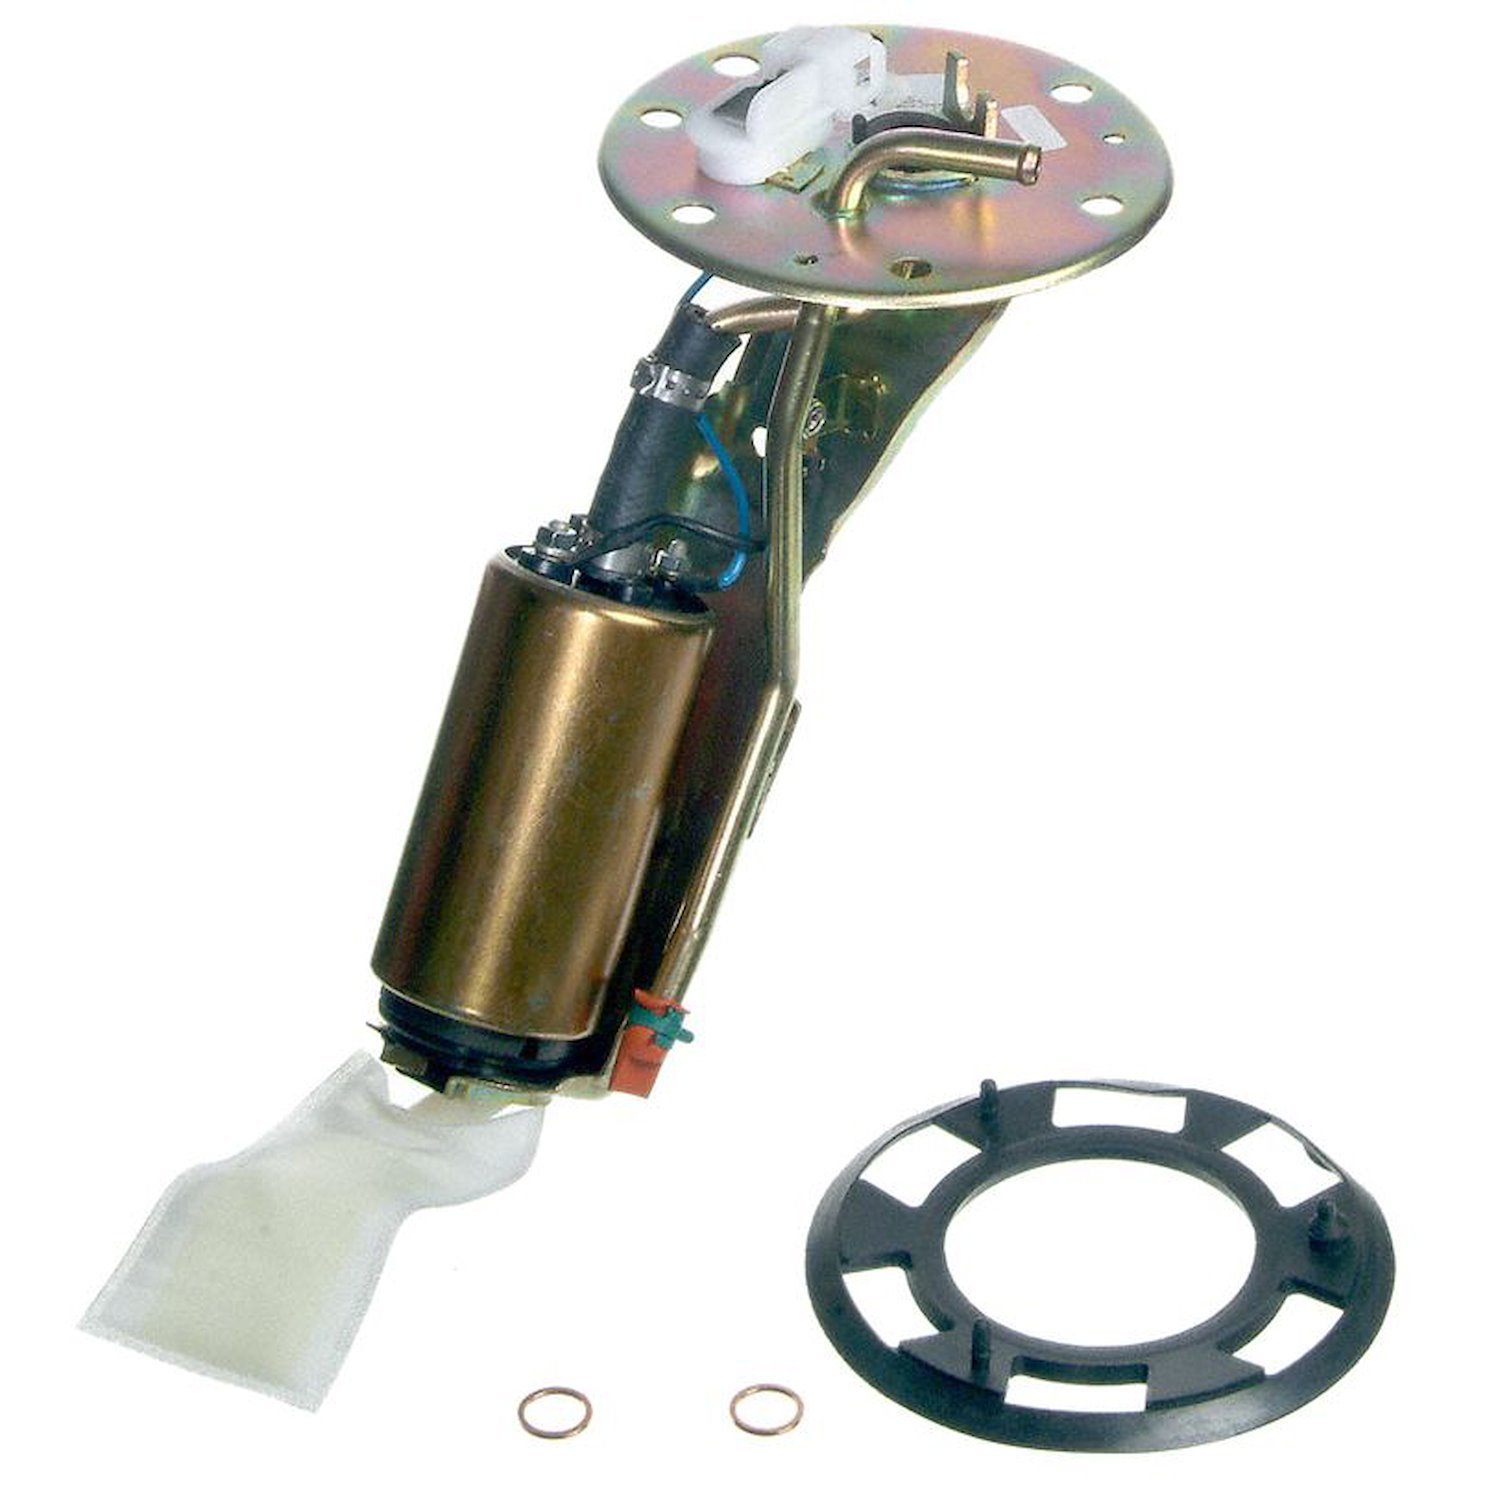 Replacement Fuel Pump Hanger Assembly for 1986-1989 Honda